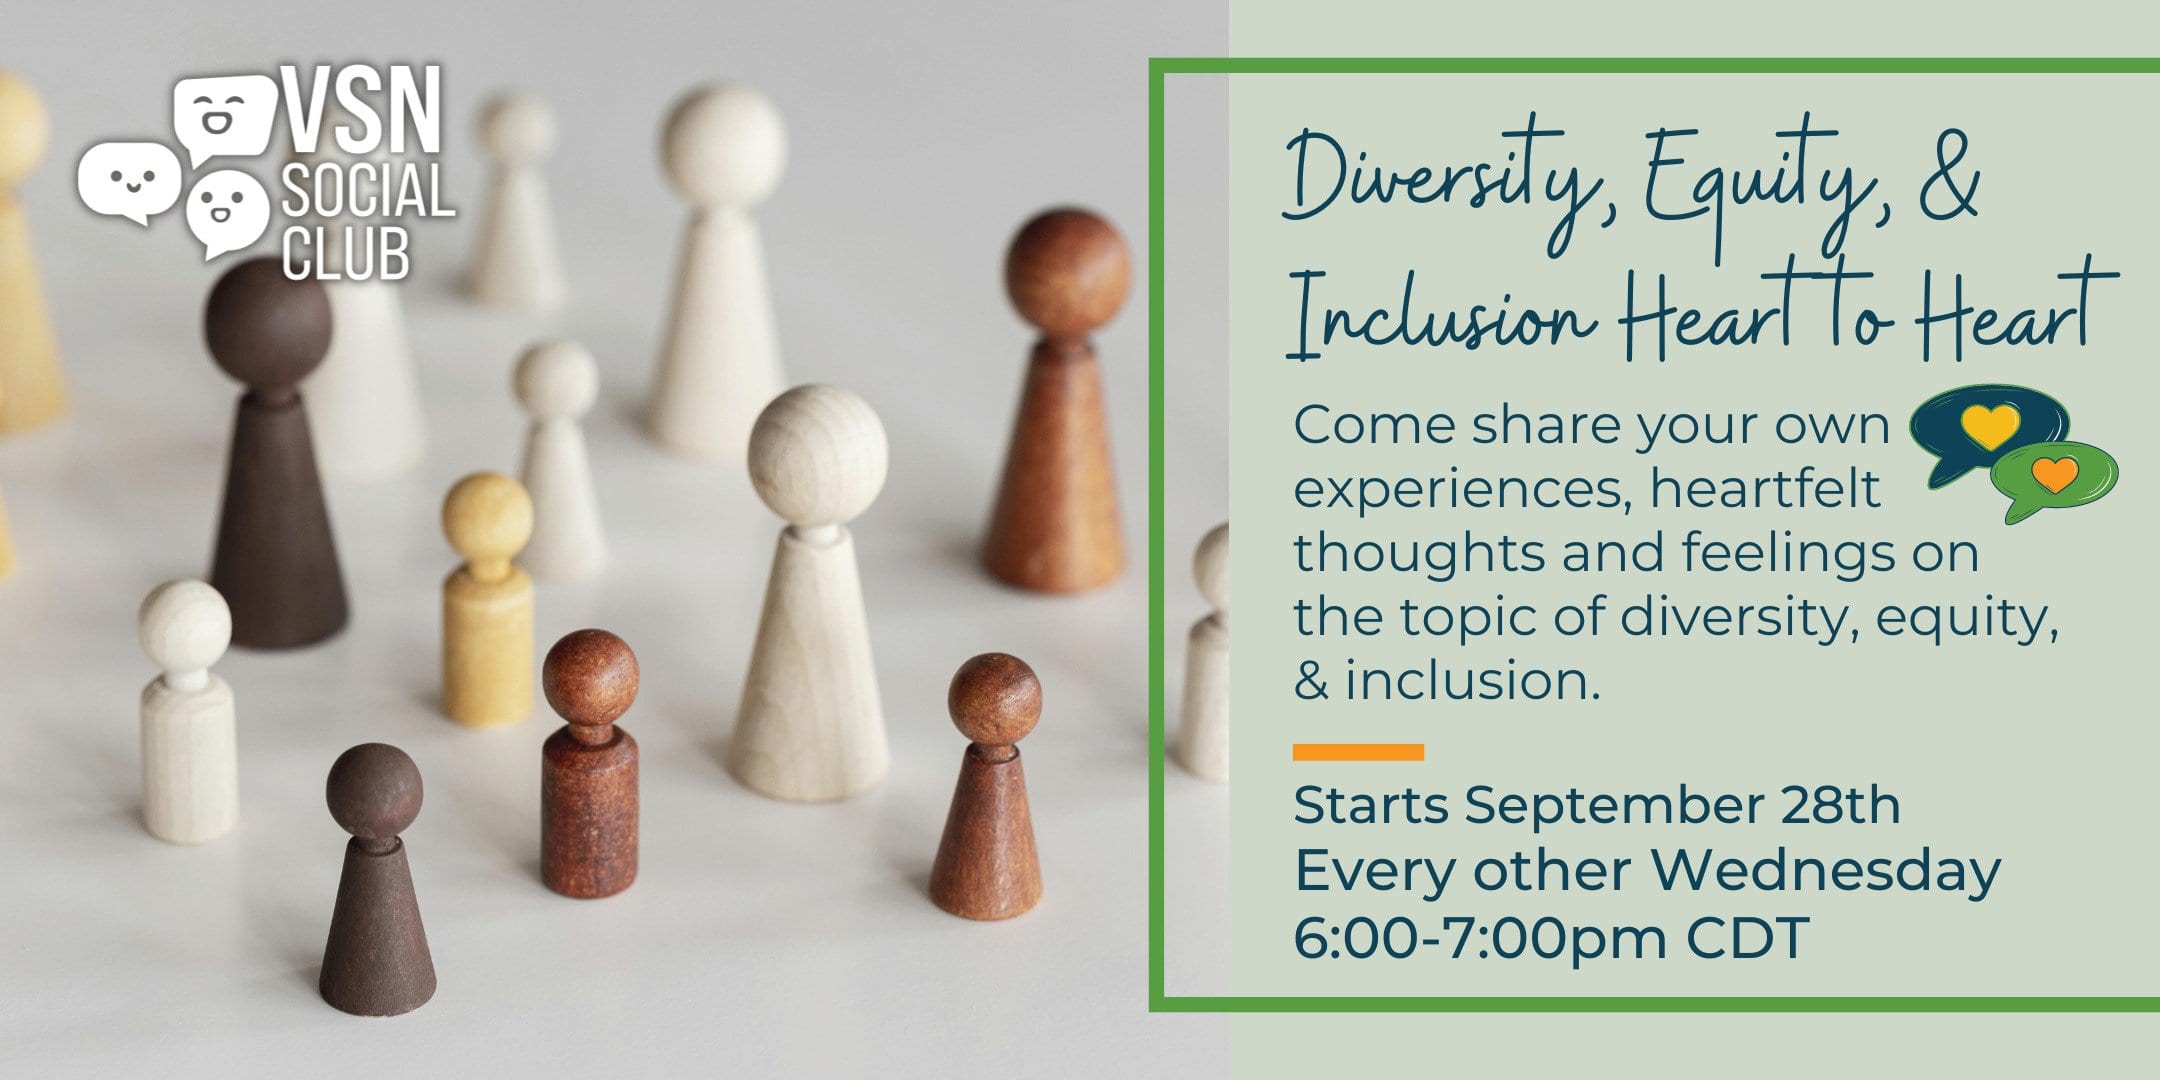 Diversity, Equity, & Inclusion Heart to Heart Wednesdays @ 6pm CDT